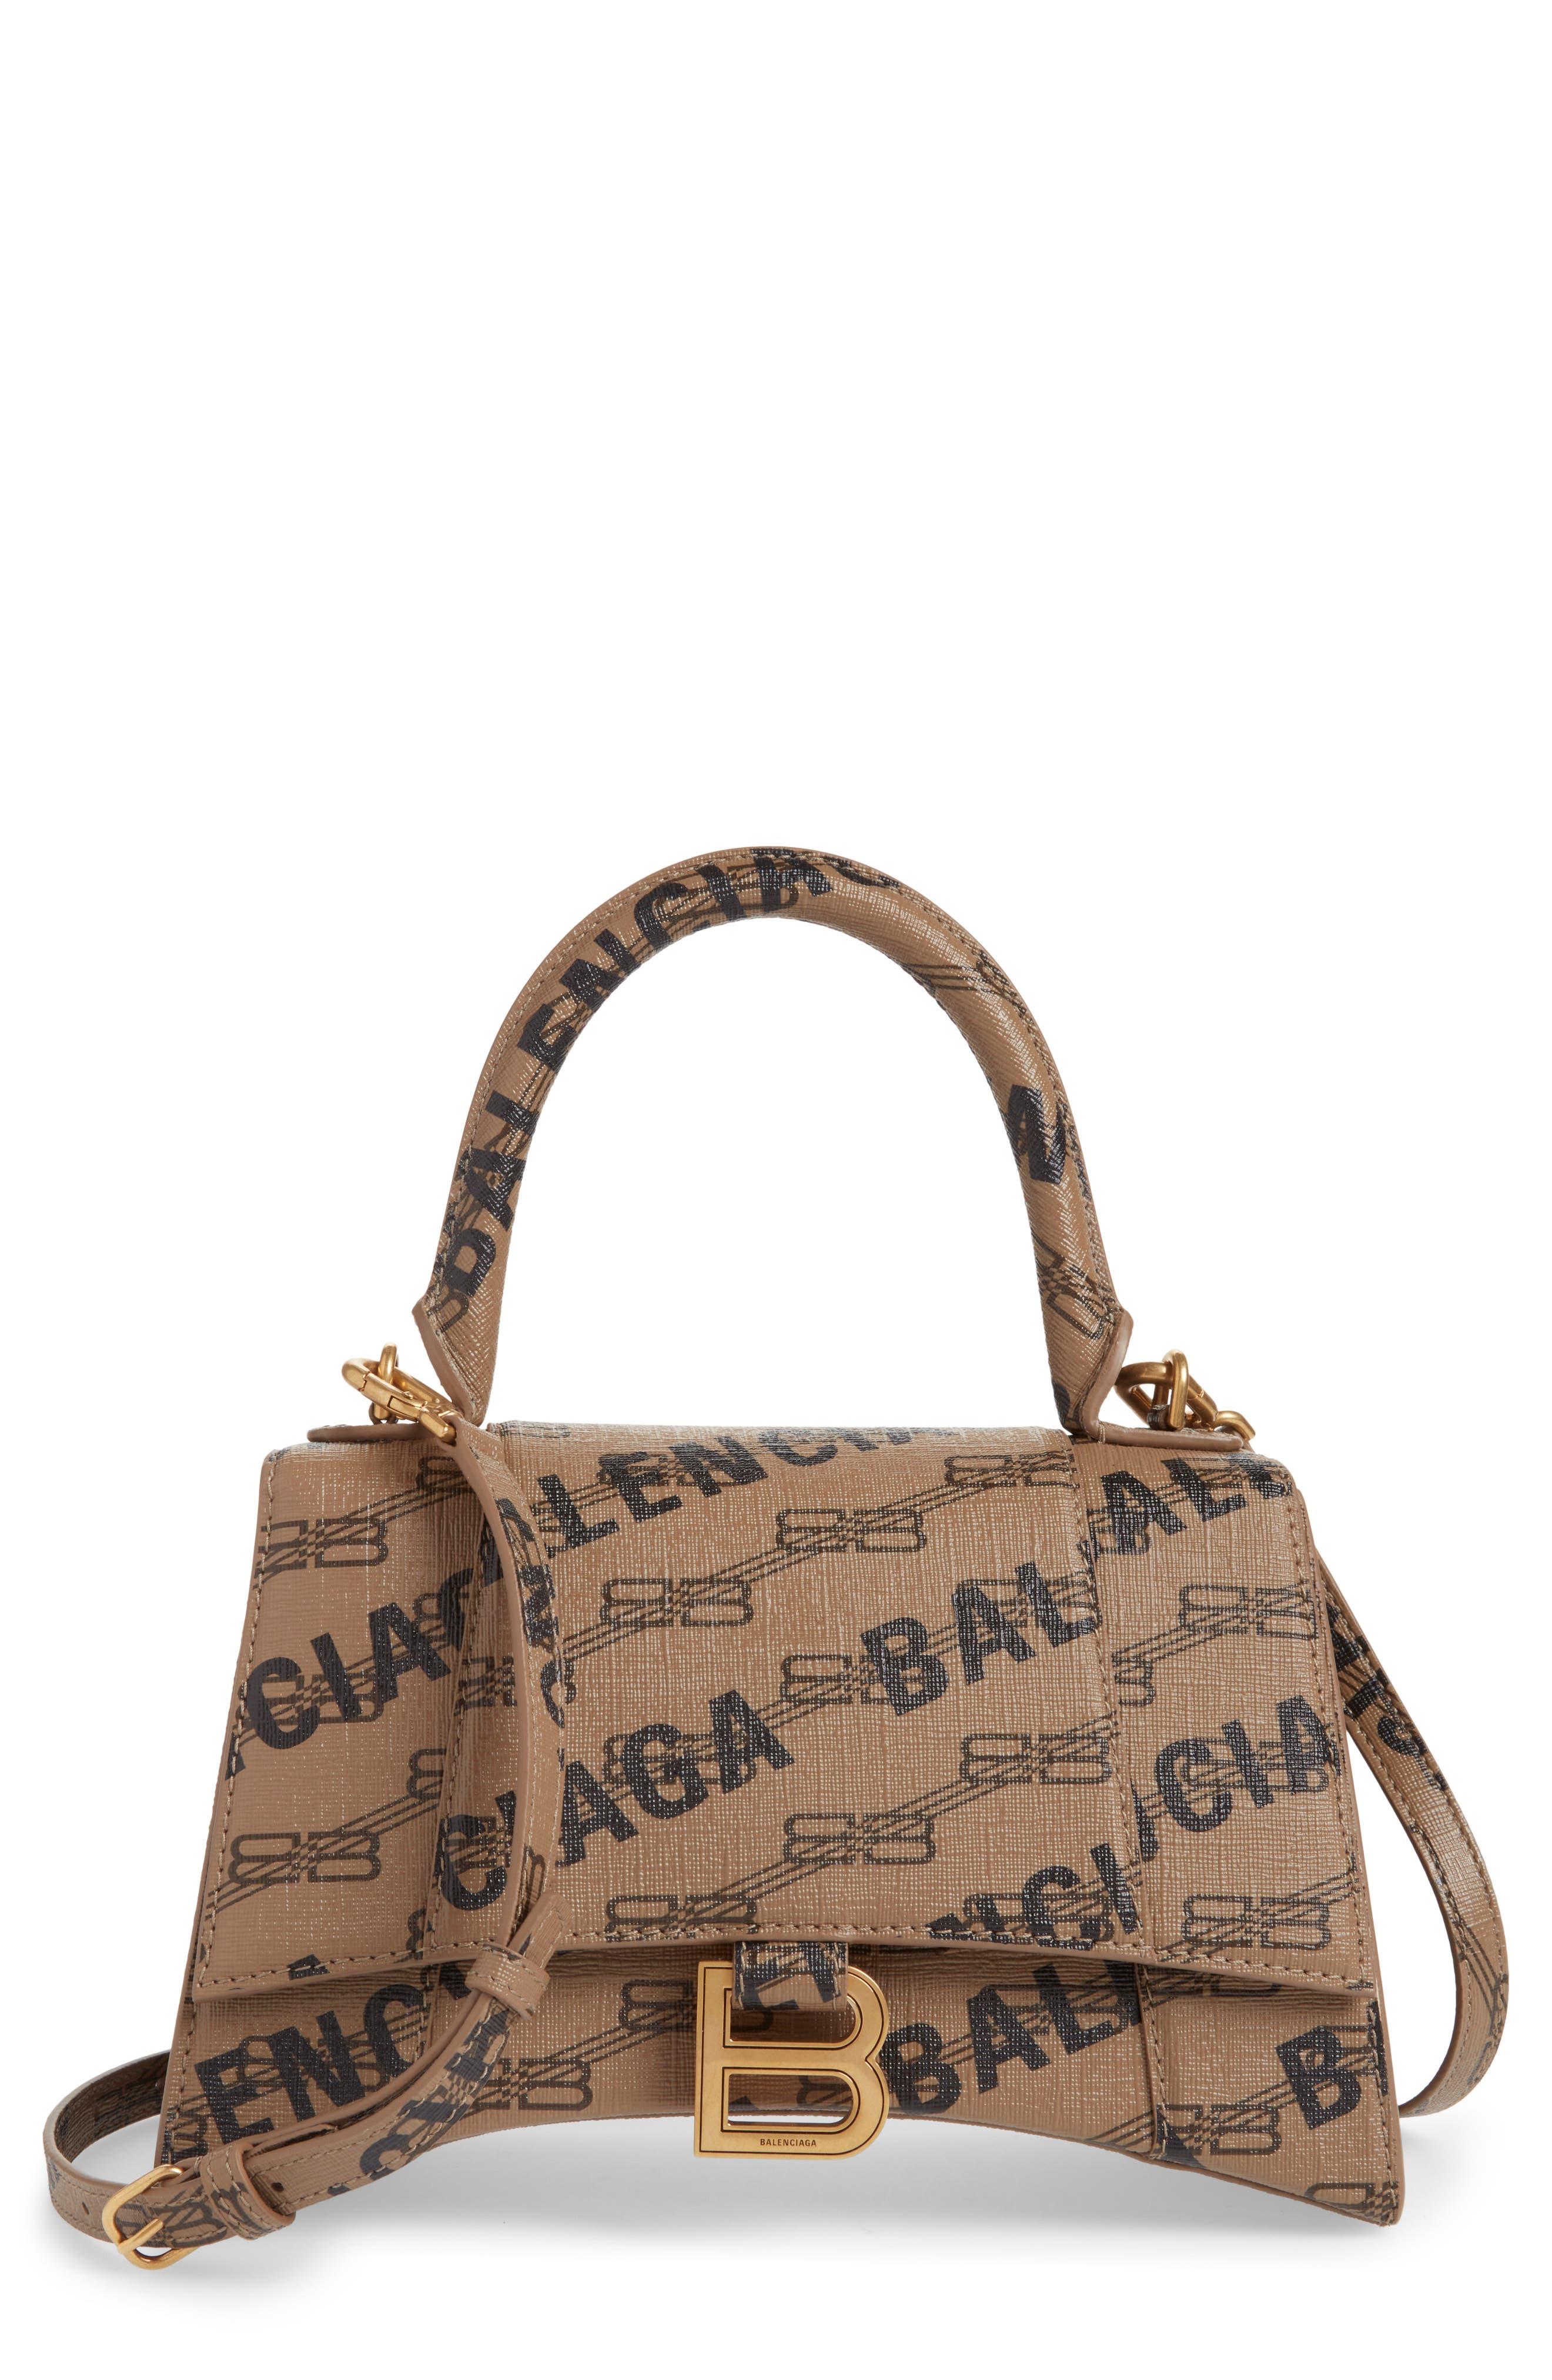 Balenciaga Hourglass License Bb Monogram Leather Top Handle Bag in Brown